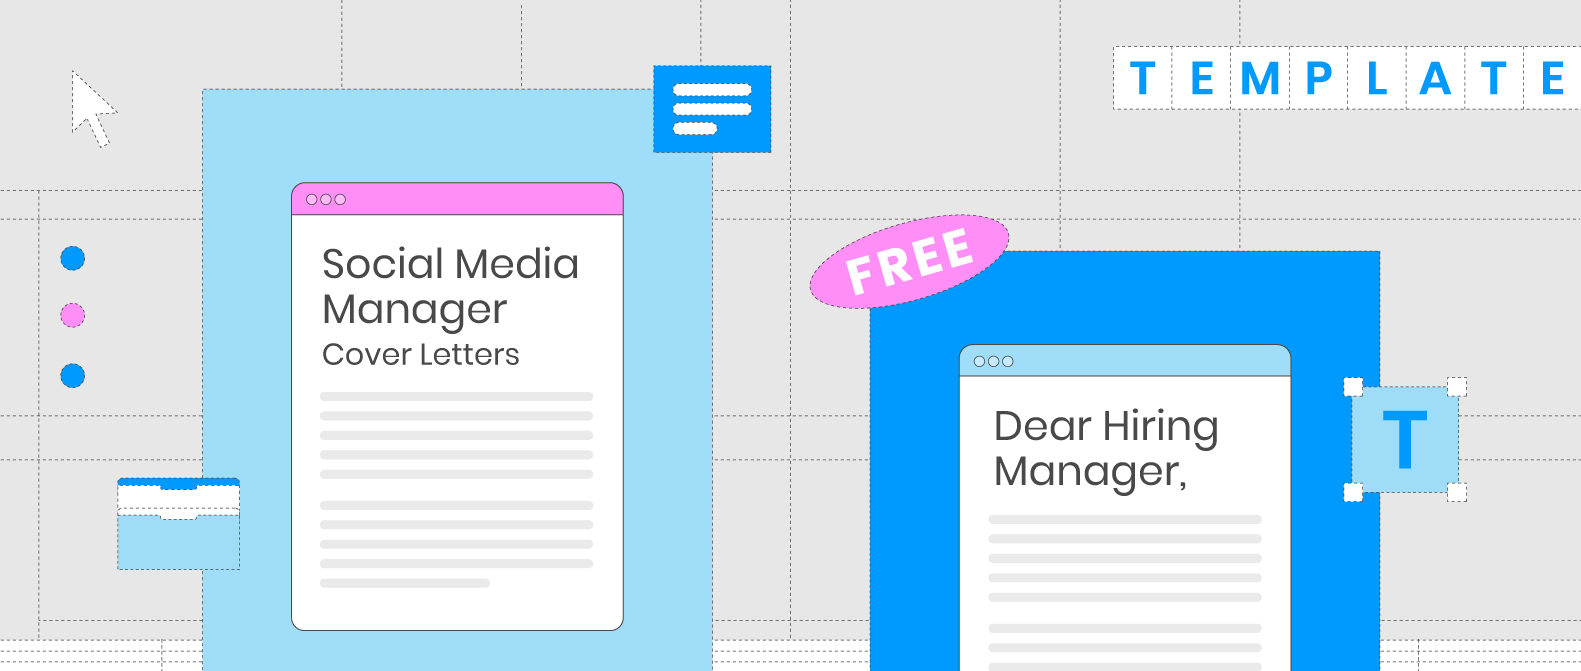 Social Media Manager Cover Letter templates banner with graphic of cover letter reading Dear Hiring Manager on a computer